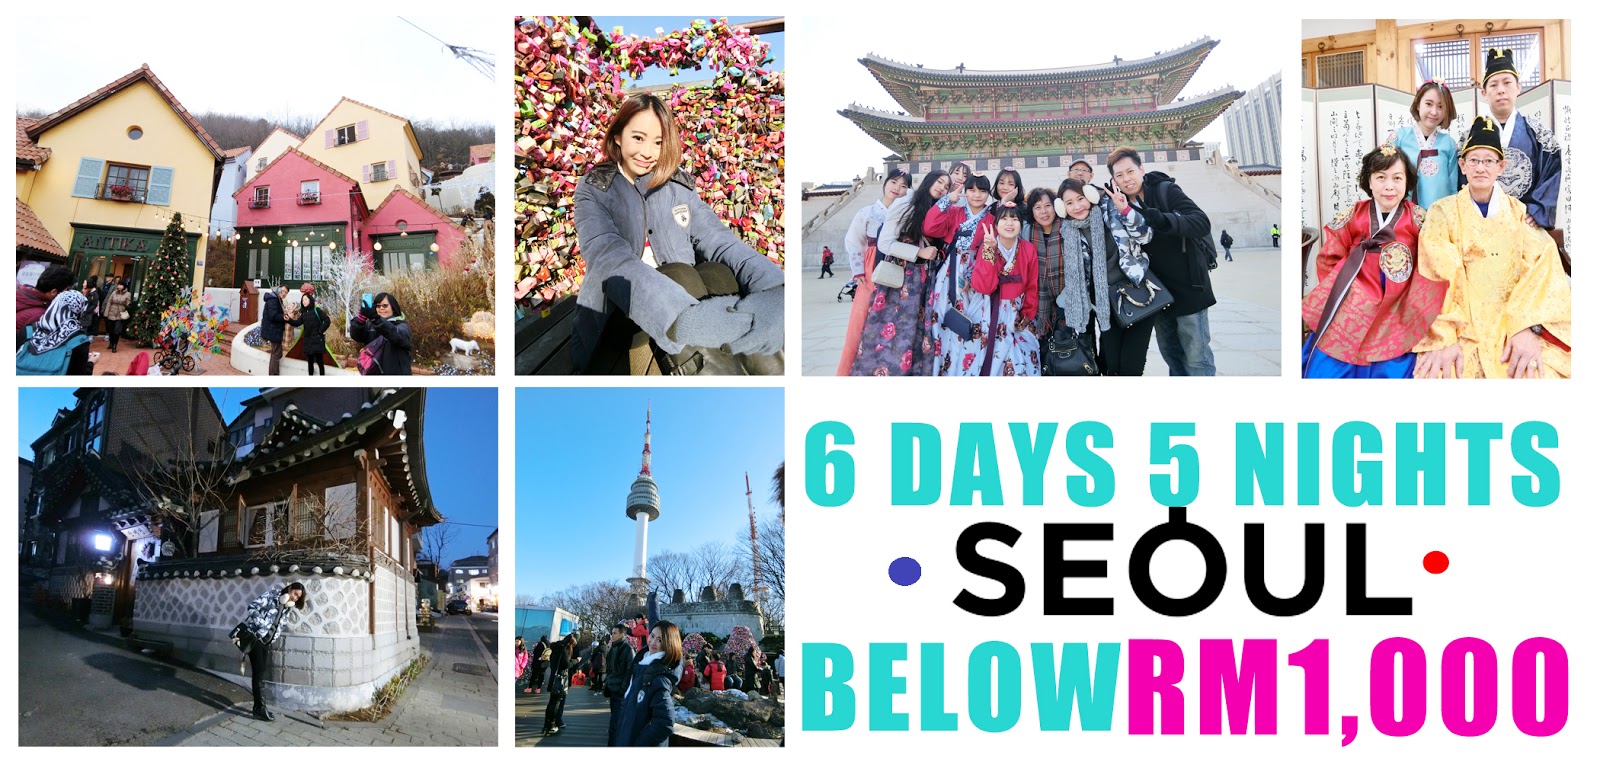 [TRAVEL] My 6 Days 5 nights SEOUL Itinerary that spend below RM1000 ! ♥